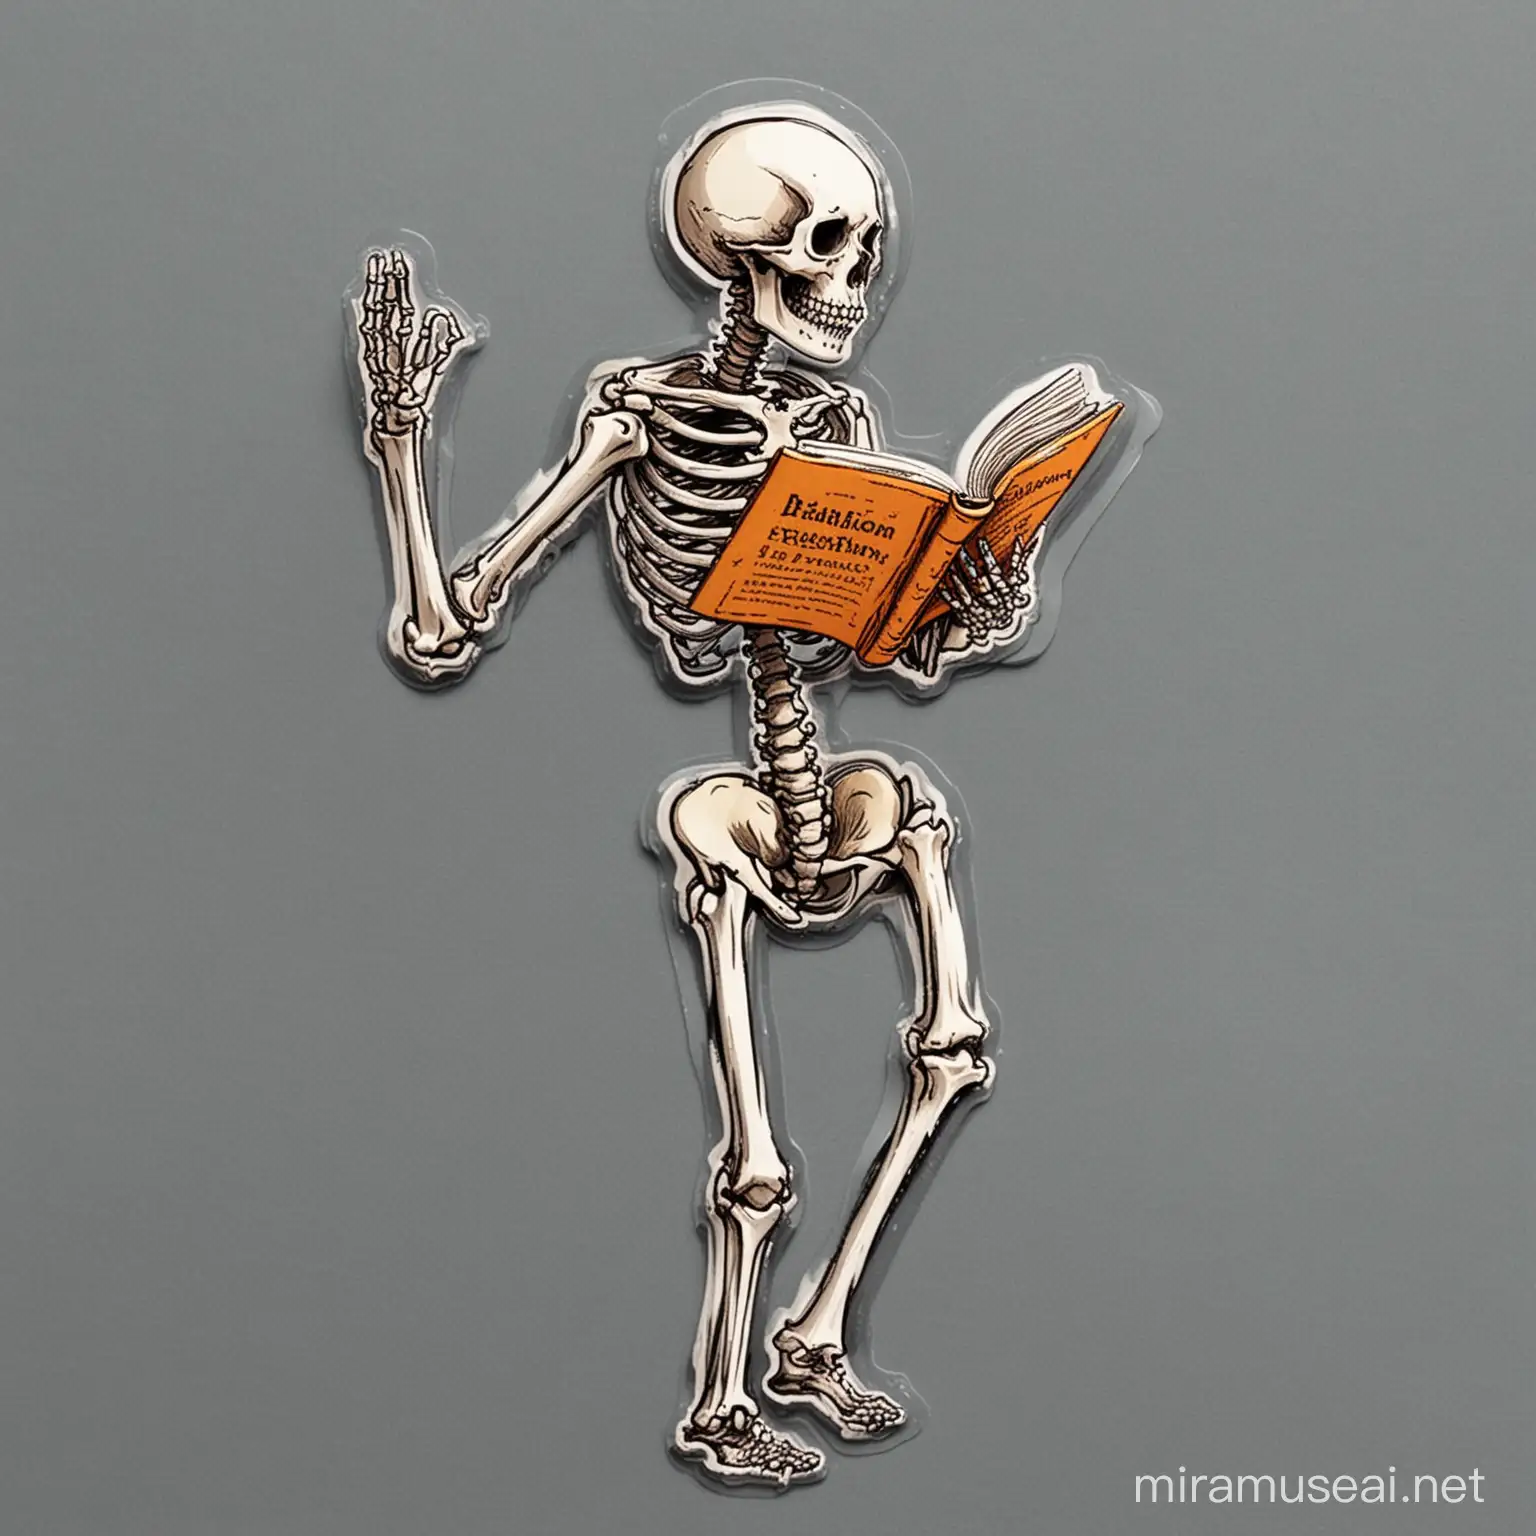 A higher quality illustration sticker of skeleton dancing and reading book, 